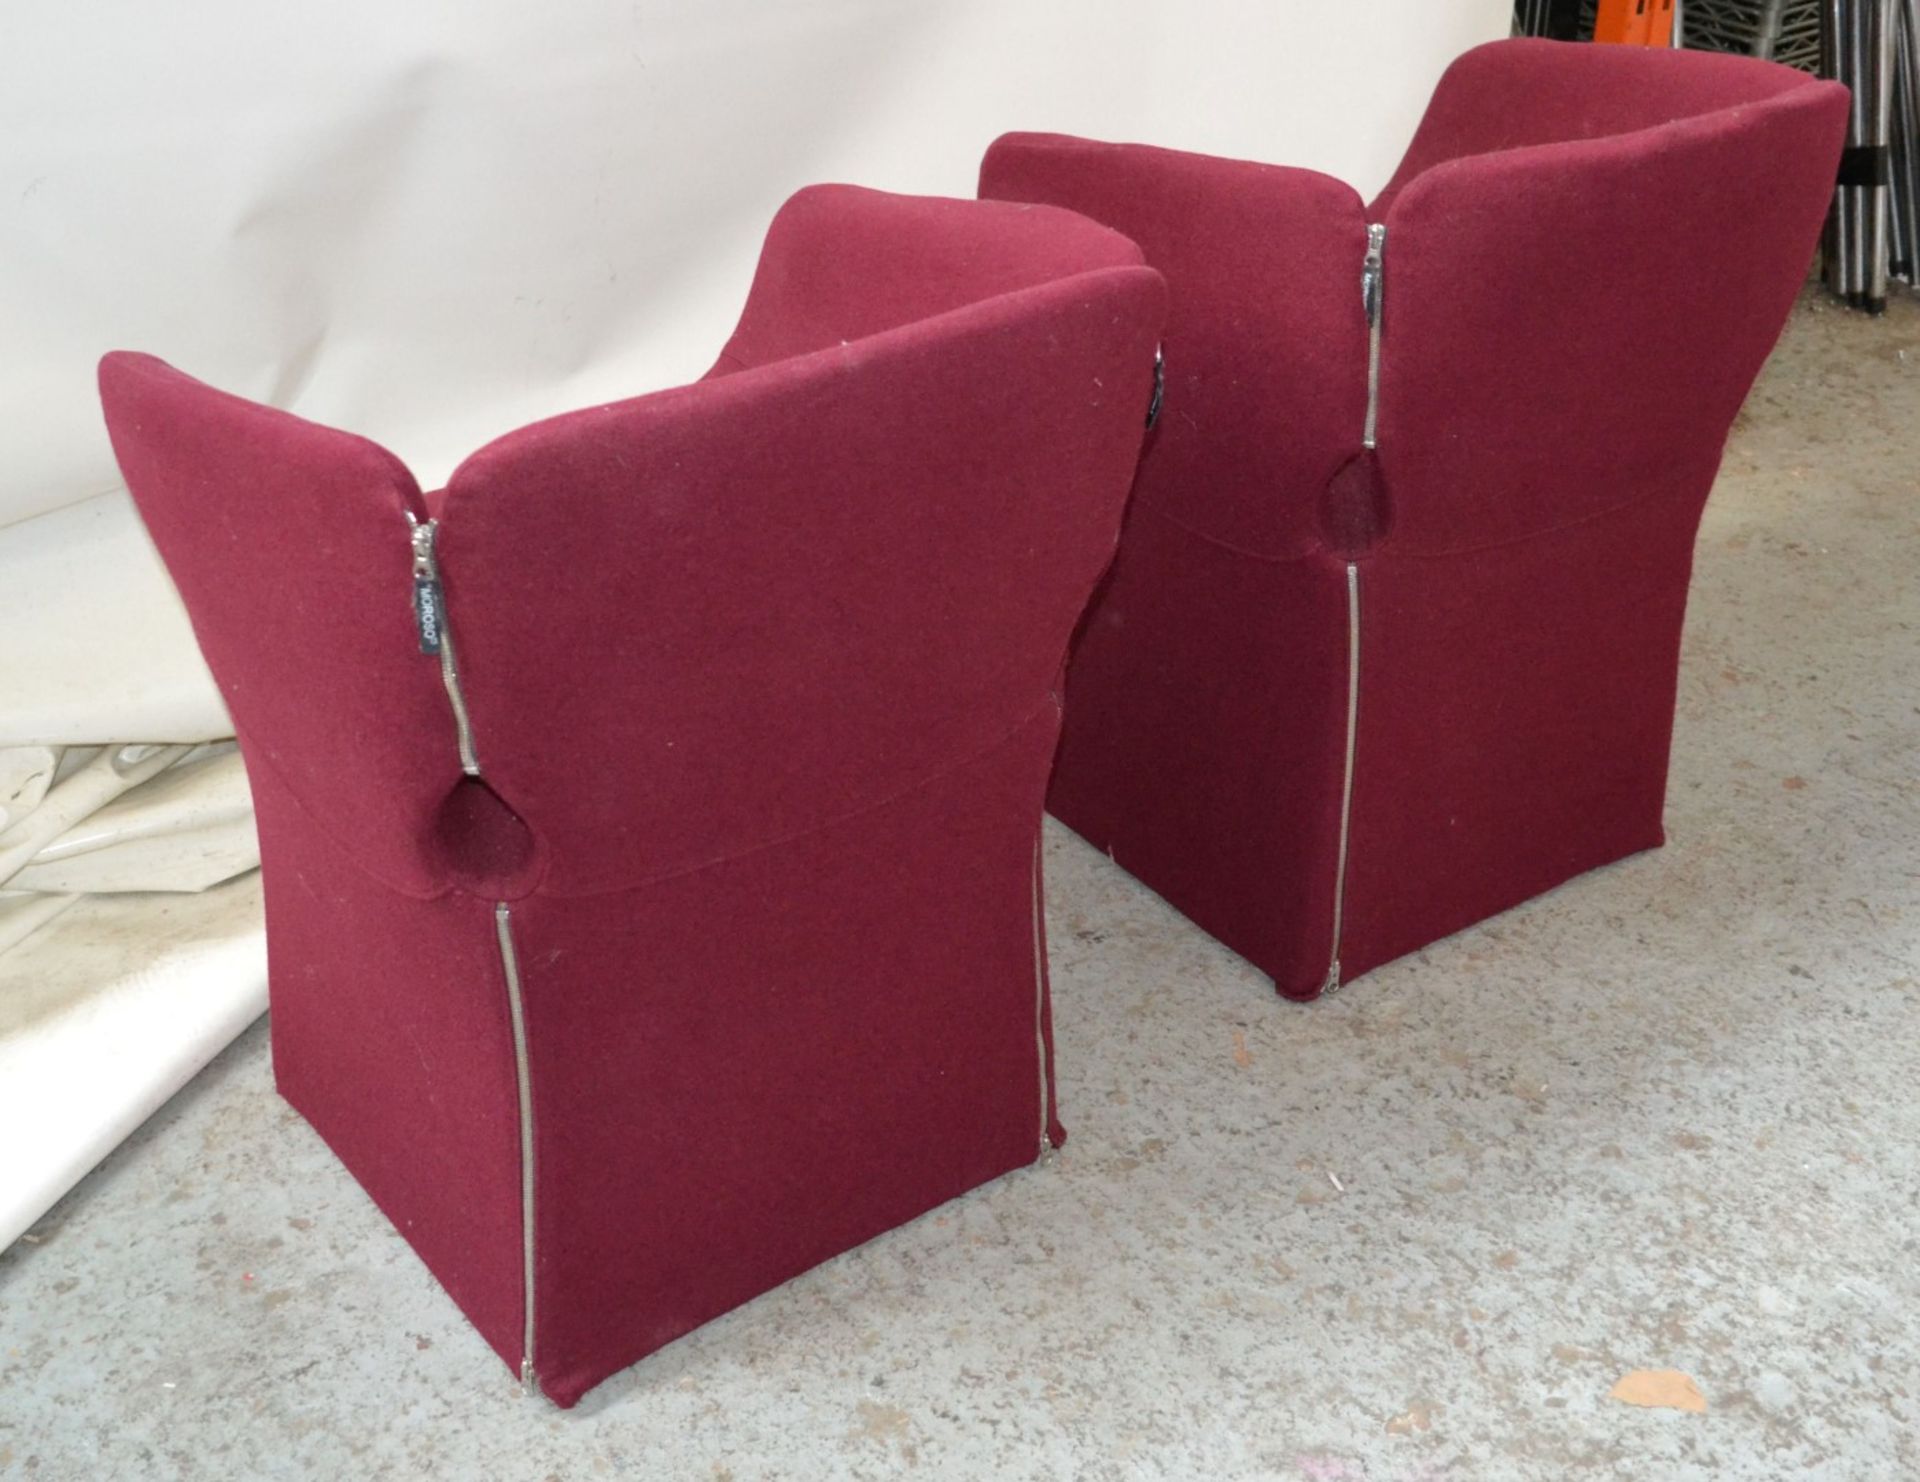 2 x Moroso Bloomy Small Armchairs Designed By Patricia Urquiola - CL314 - Location: Altrincham WA14 - Image 6 of 7